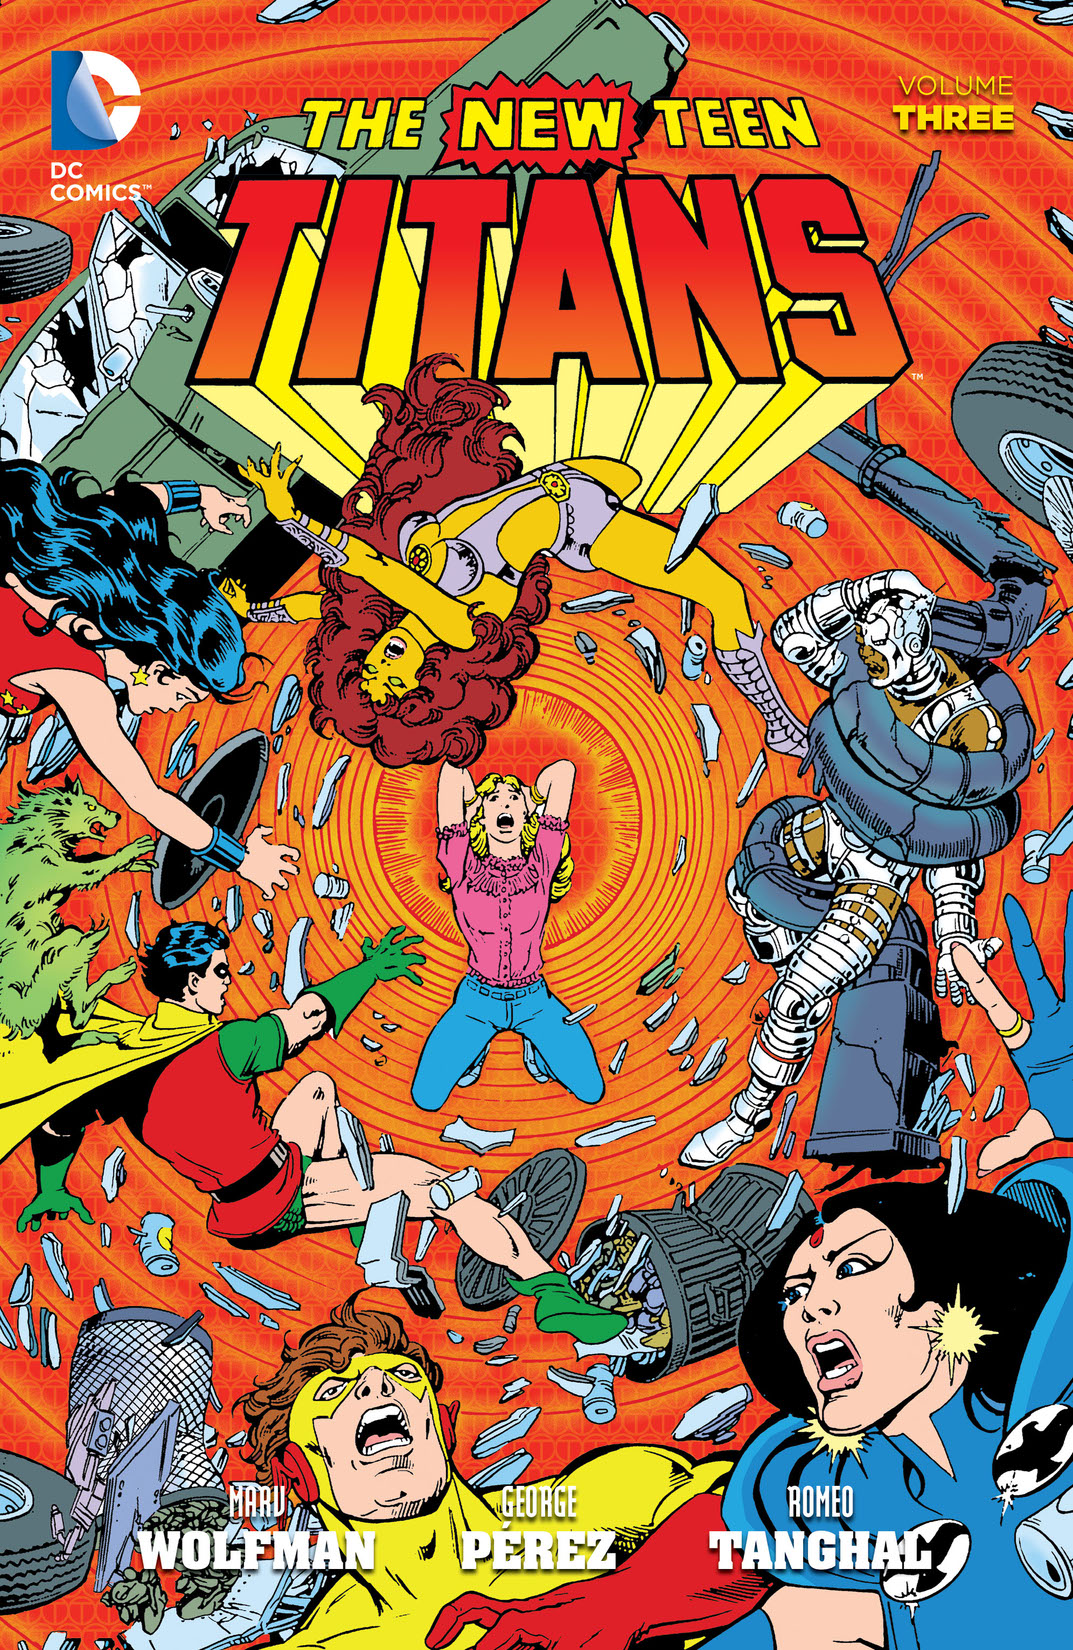 New Teen Titans Vol. 3 preview images